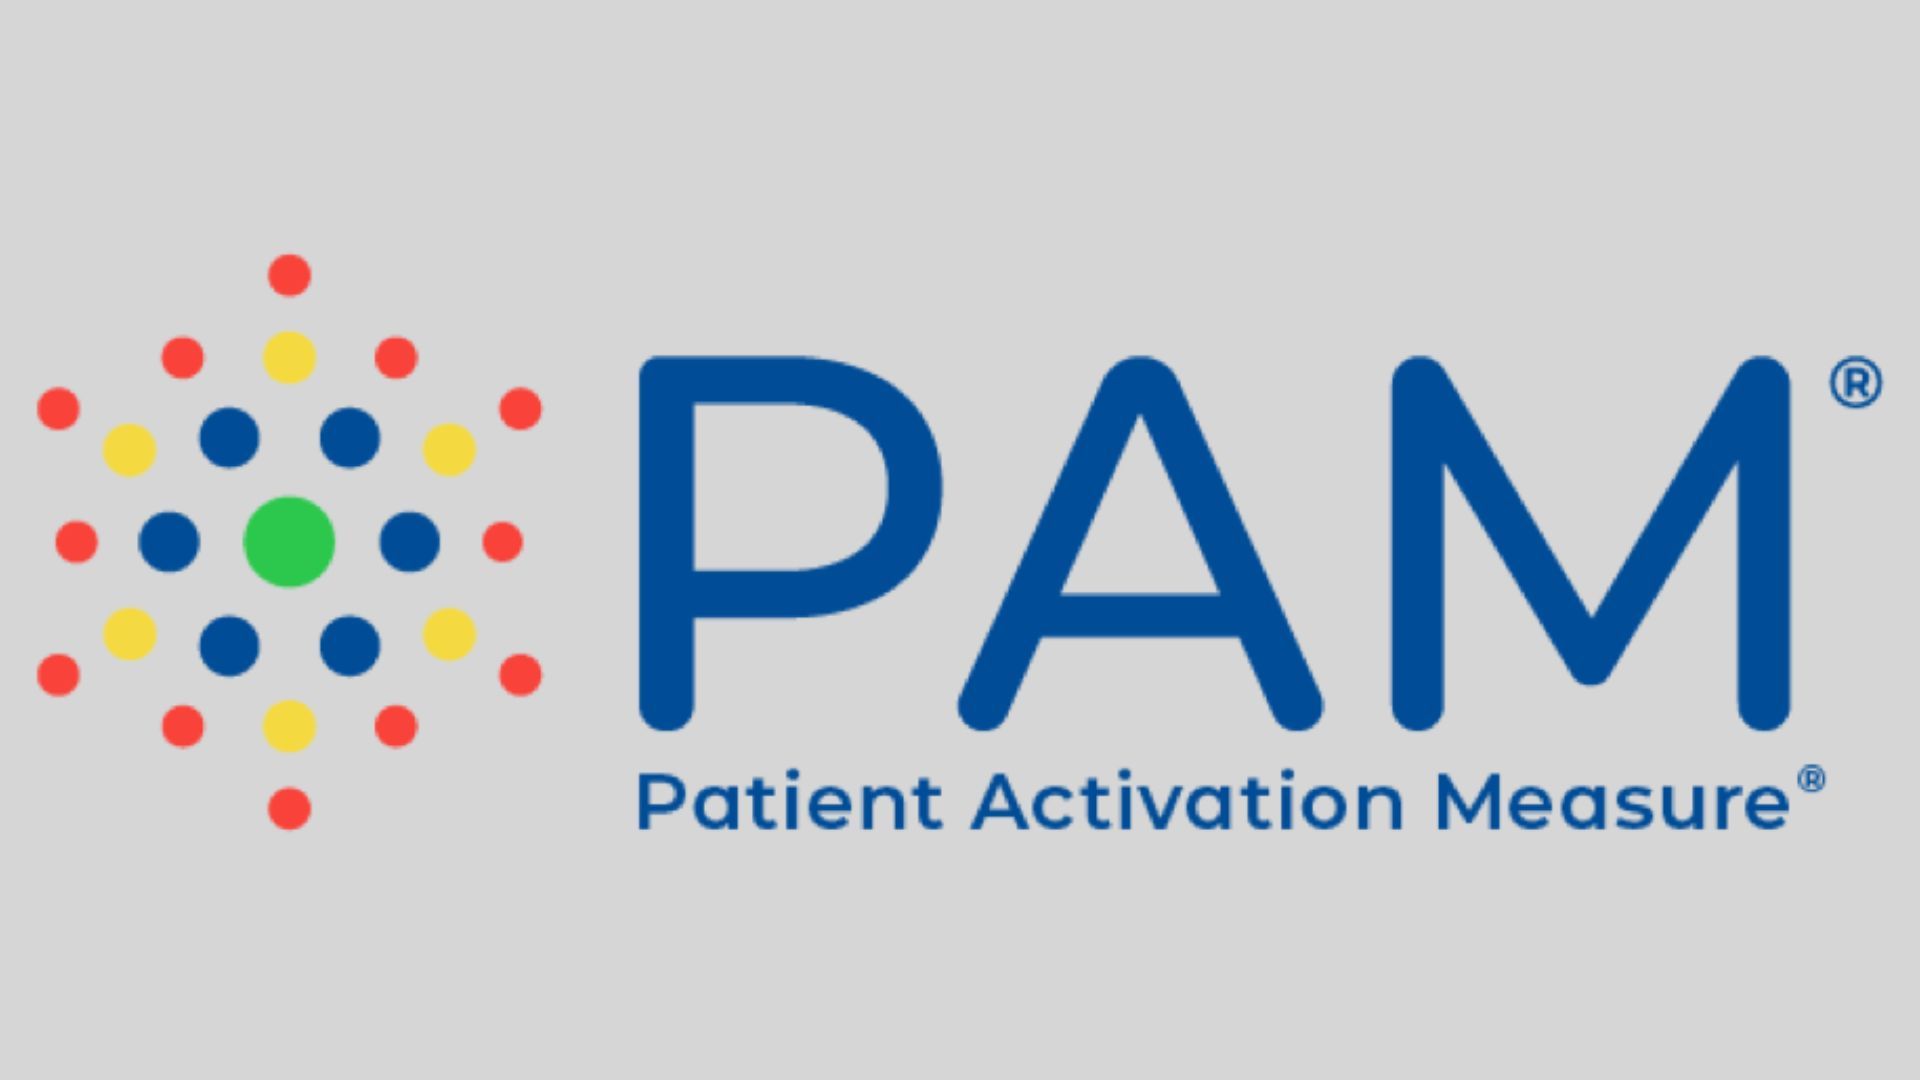 What is The Patient Activation Measure?